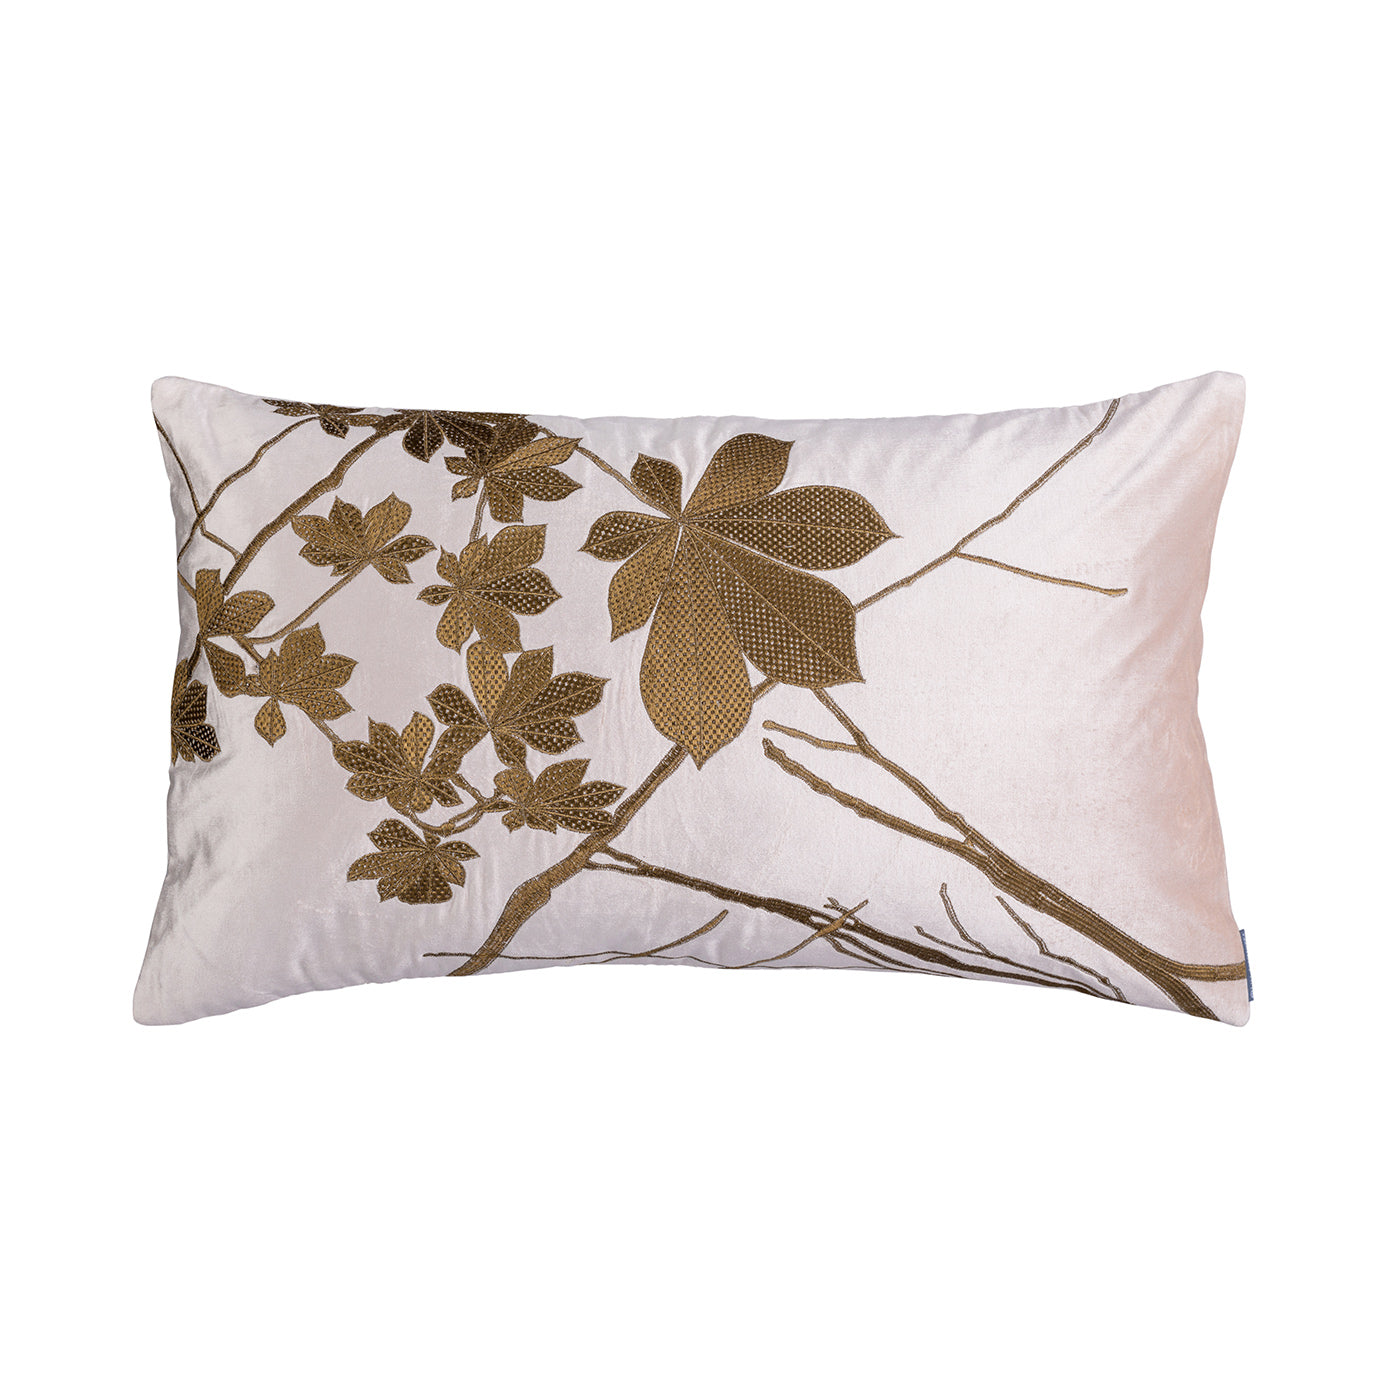 Leaf Decorative Pillow Blush Velvet With Gold Basketweave And Antique Gold Machine Embroidery 18X30